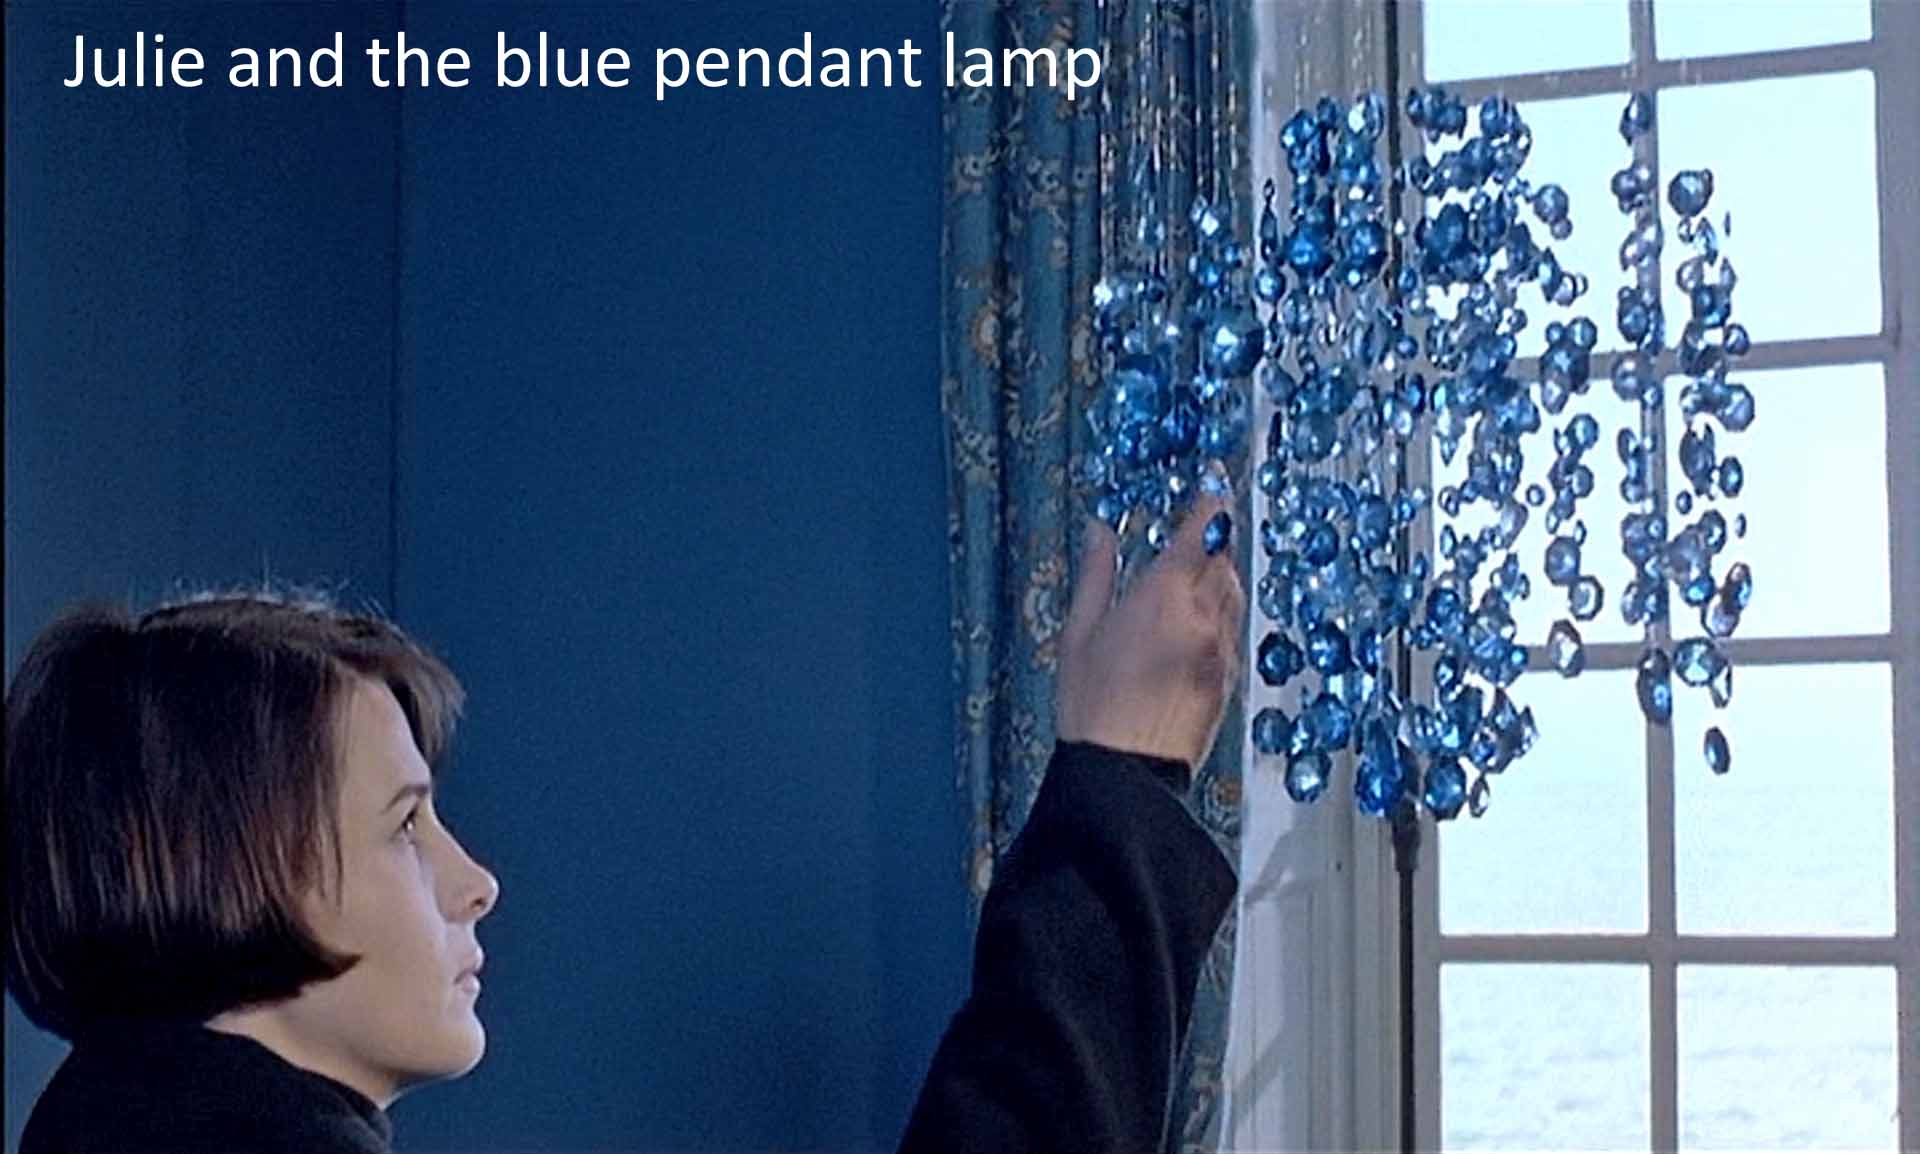 Julie and the blue pendant lamp